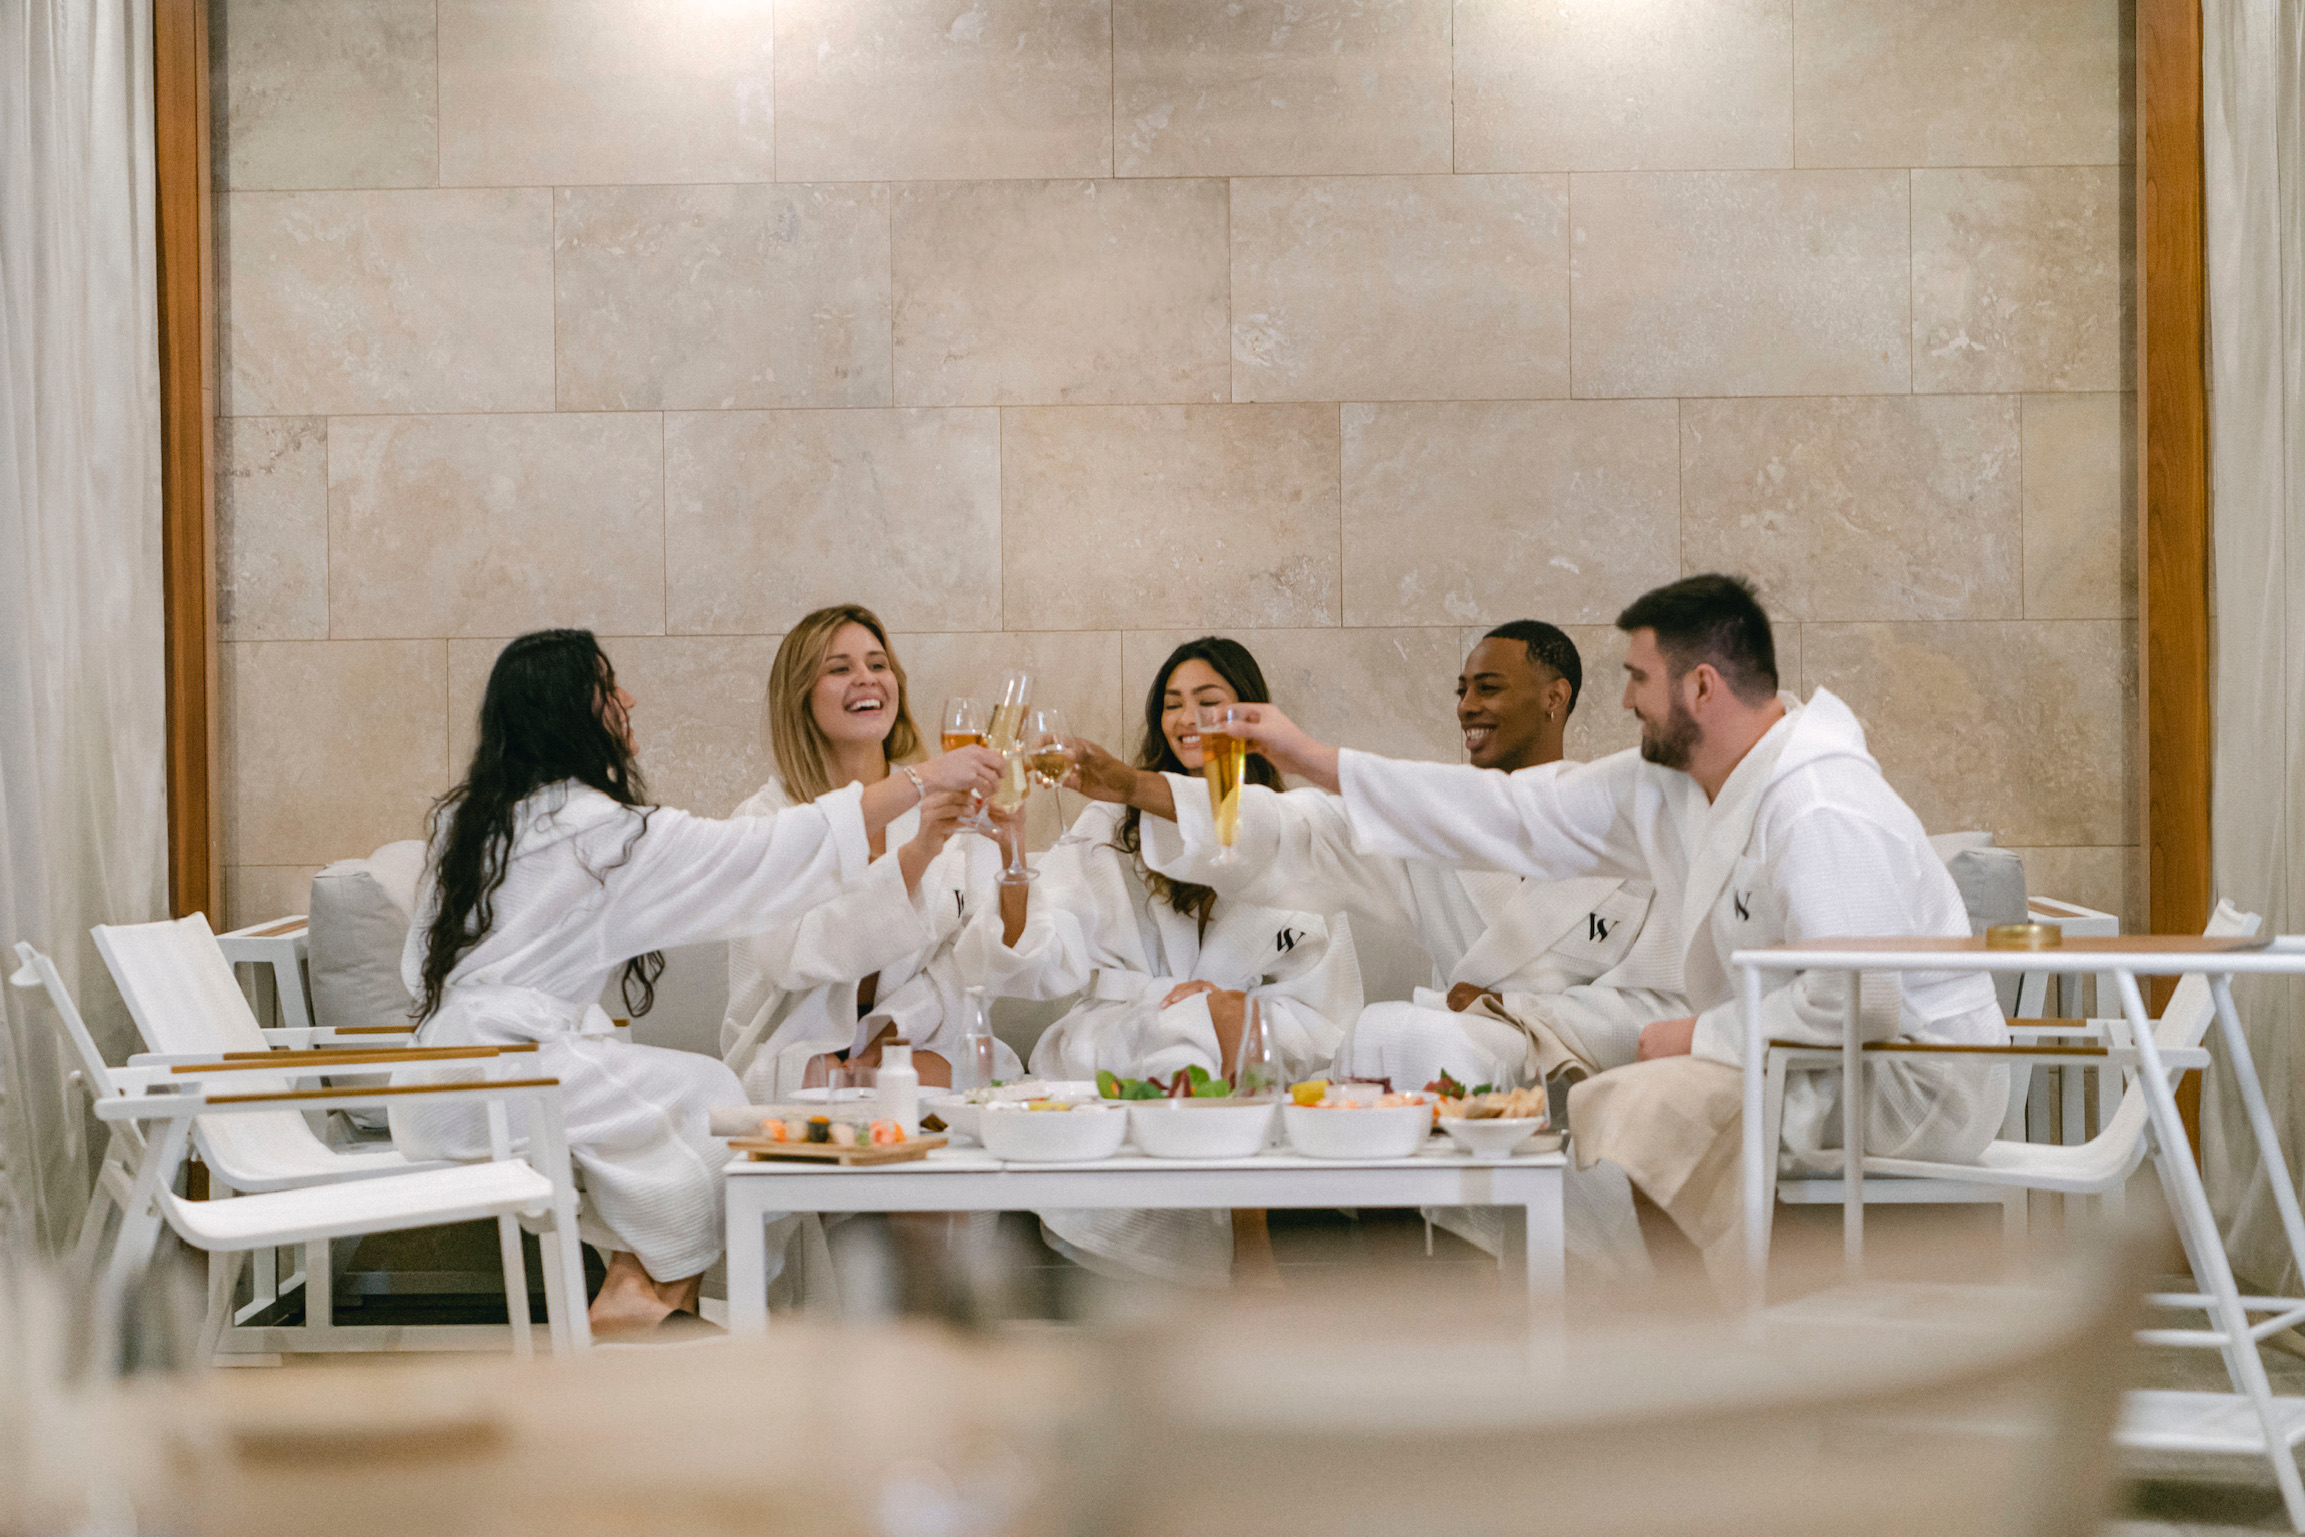 A group of people in white robes are toasting with glasses, smiling and enjoying a social moment around a low table with light refreshments, in a room with tiled walls and a relaxed spa ambiance.